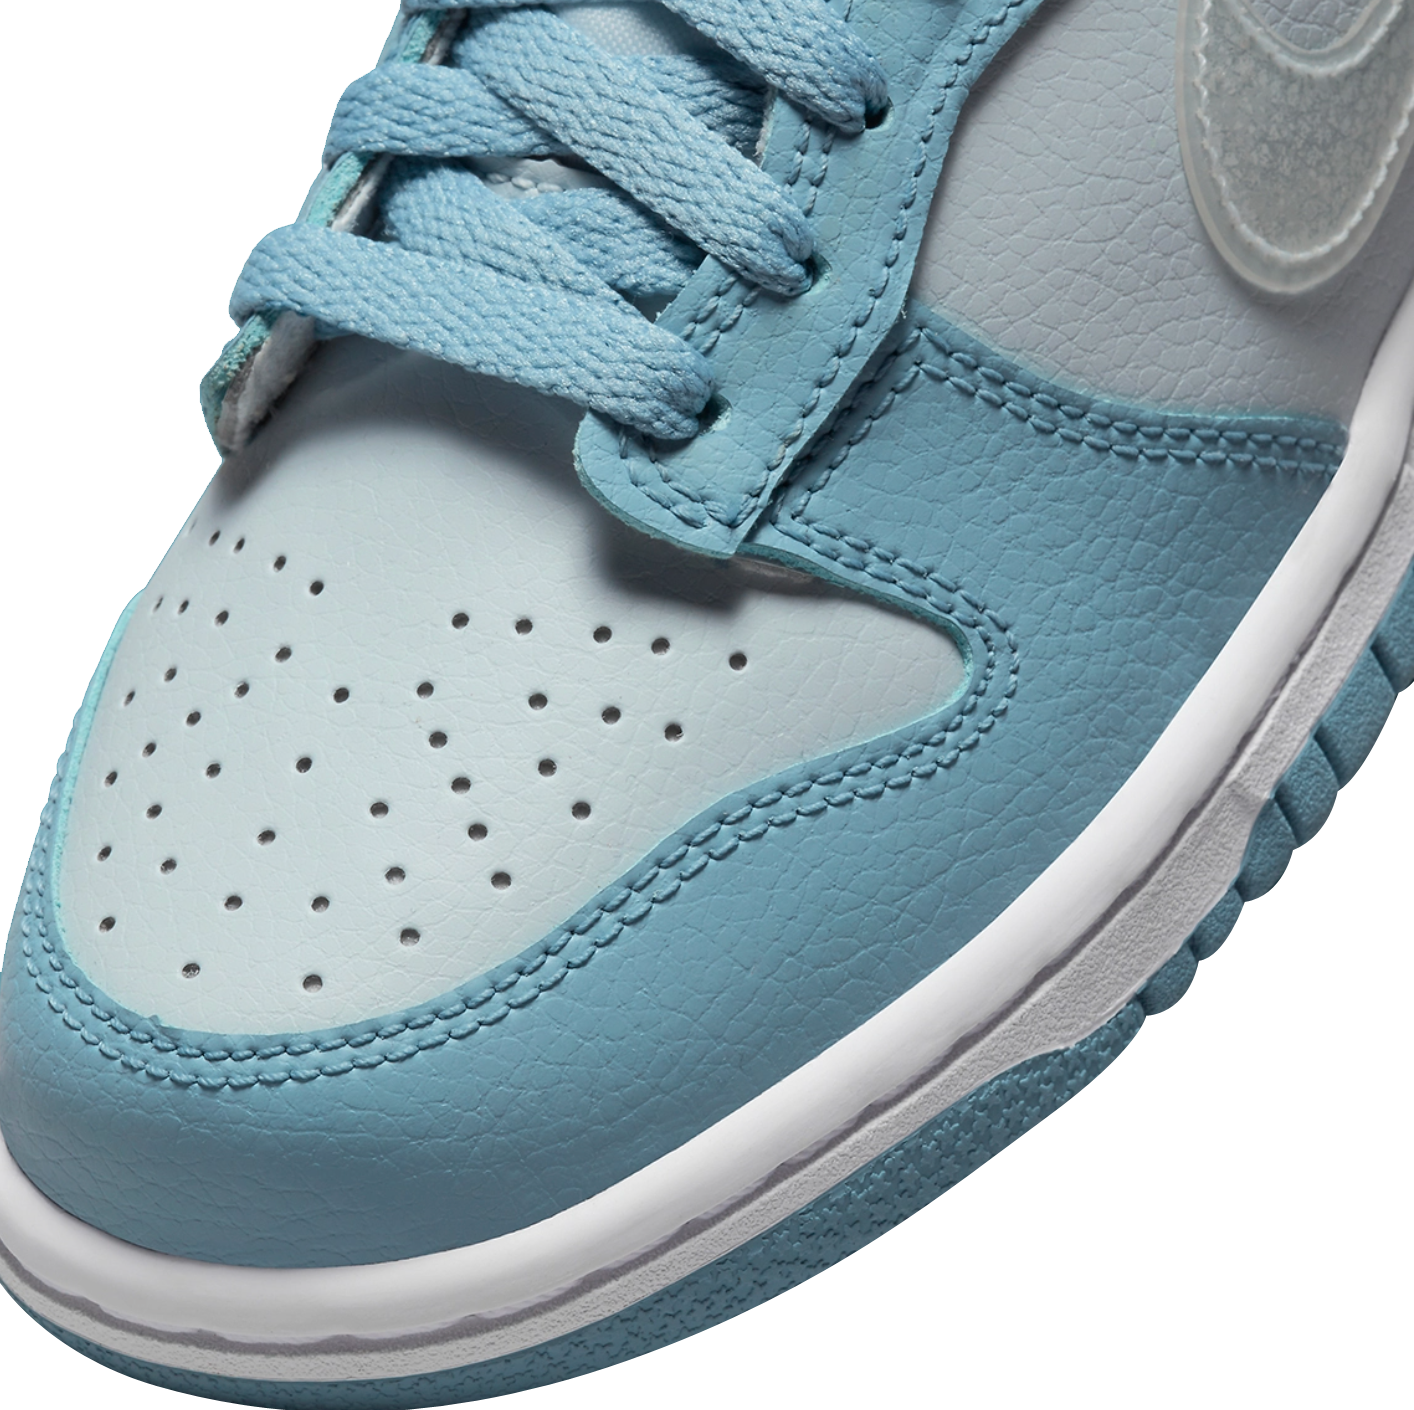 Nike Dunk Low GS Grey Blue DH9765-401